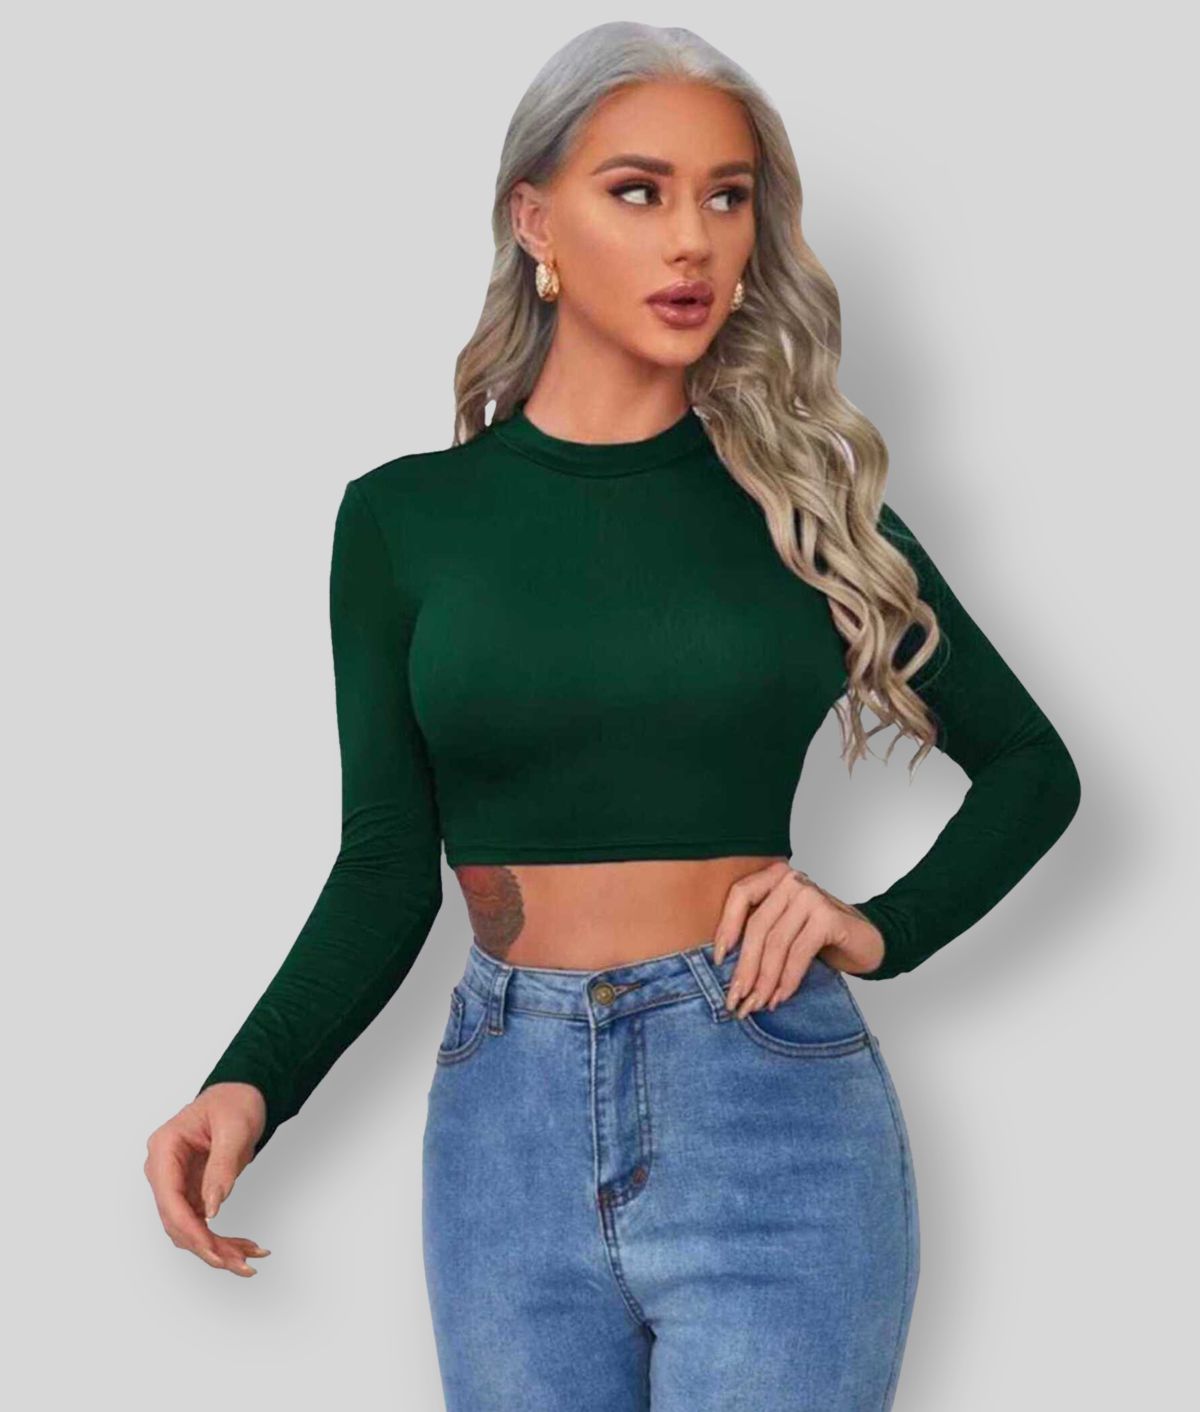     			Dream Beauty Fashion - Green Polyester Women's Crop Top ( Pack of 1 )